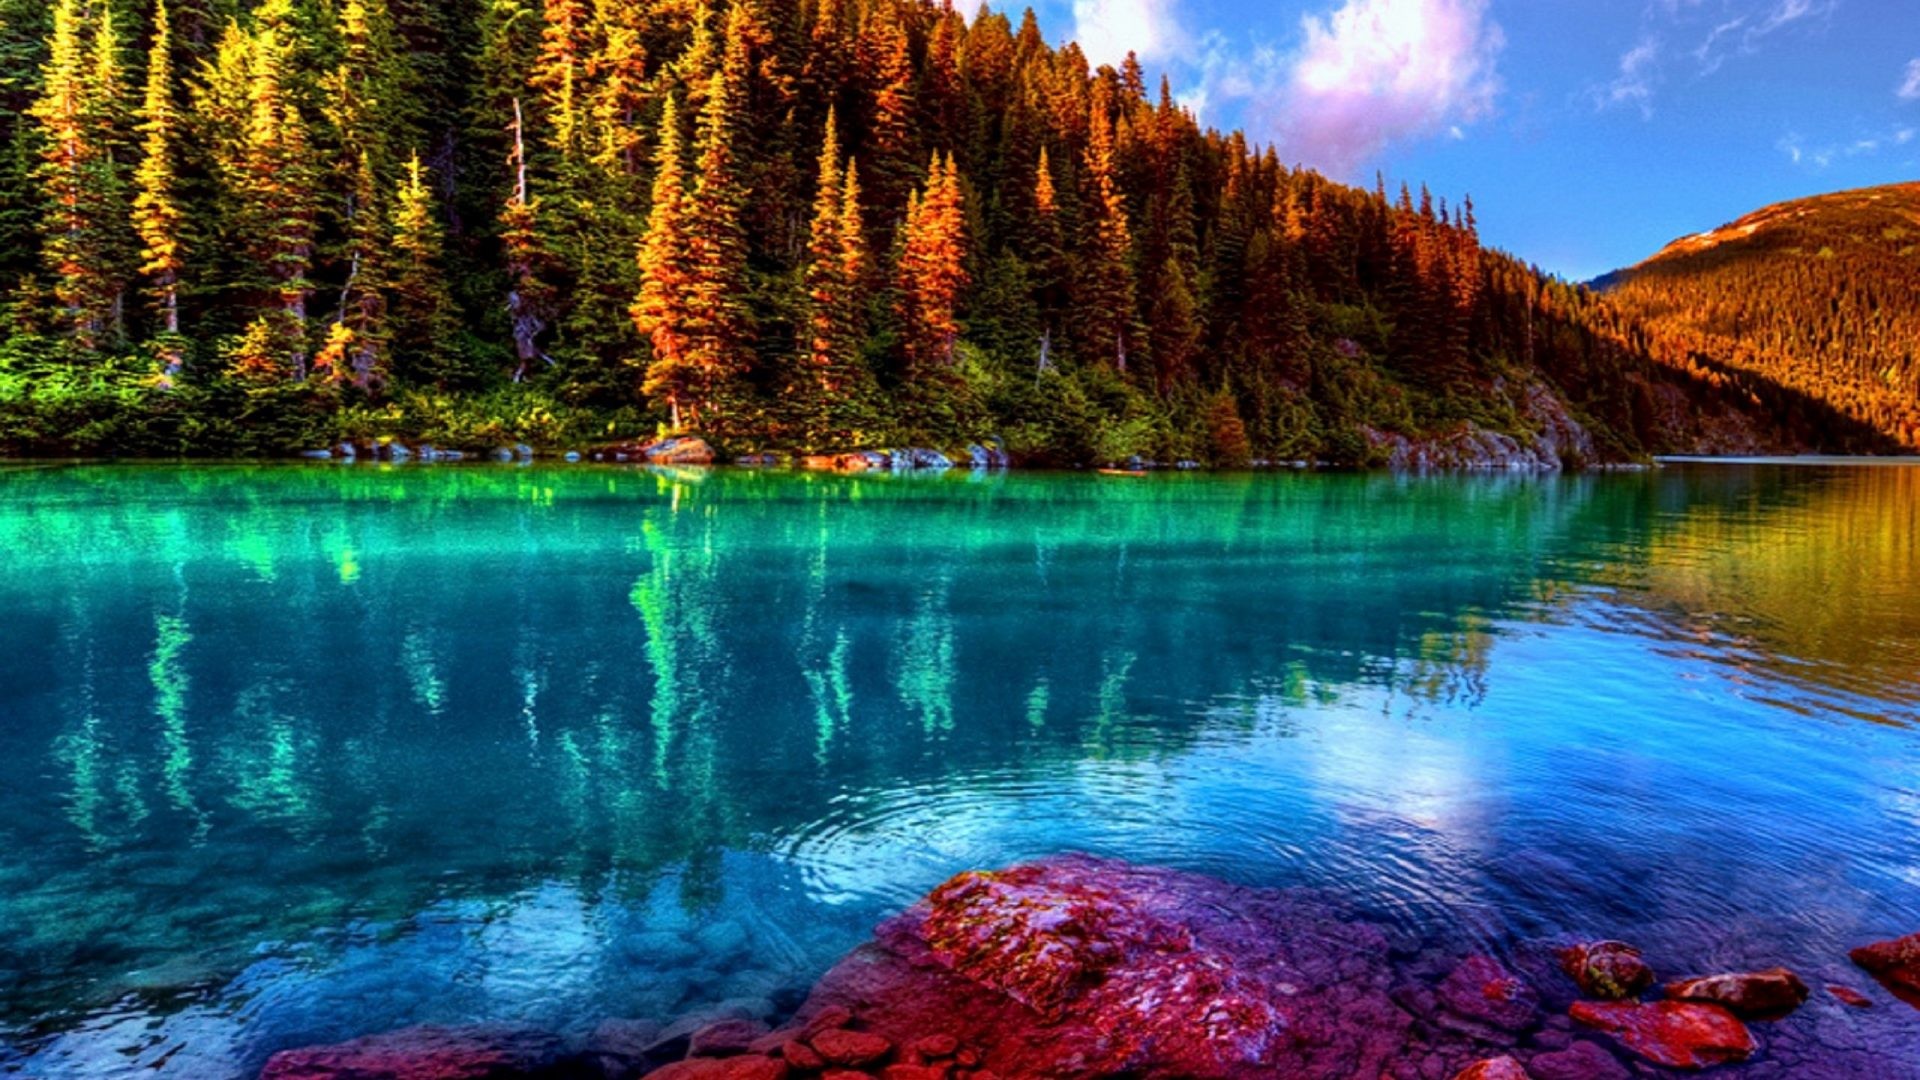 1920x1080 Waterscapes Tag - Wonderland Lake Autumn Places Waterscapes Lakes  Attractions Dreams Photography Creative Pre Nature Trees